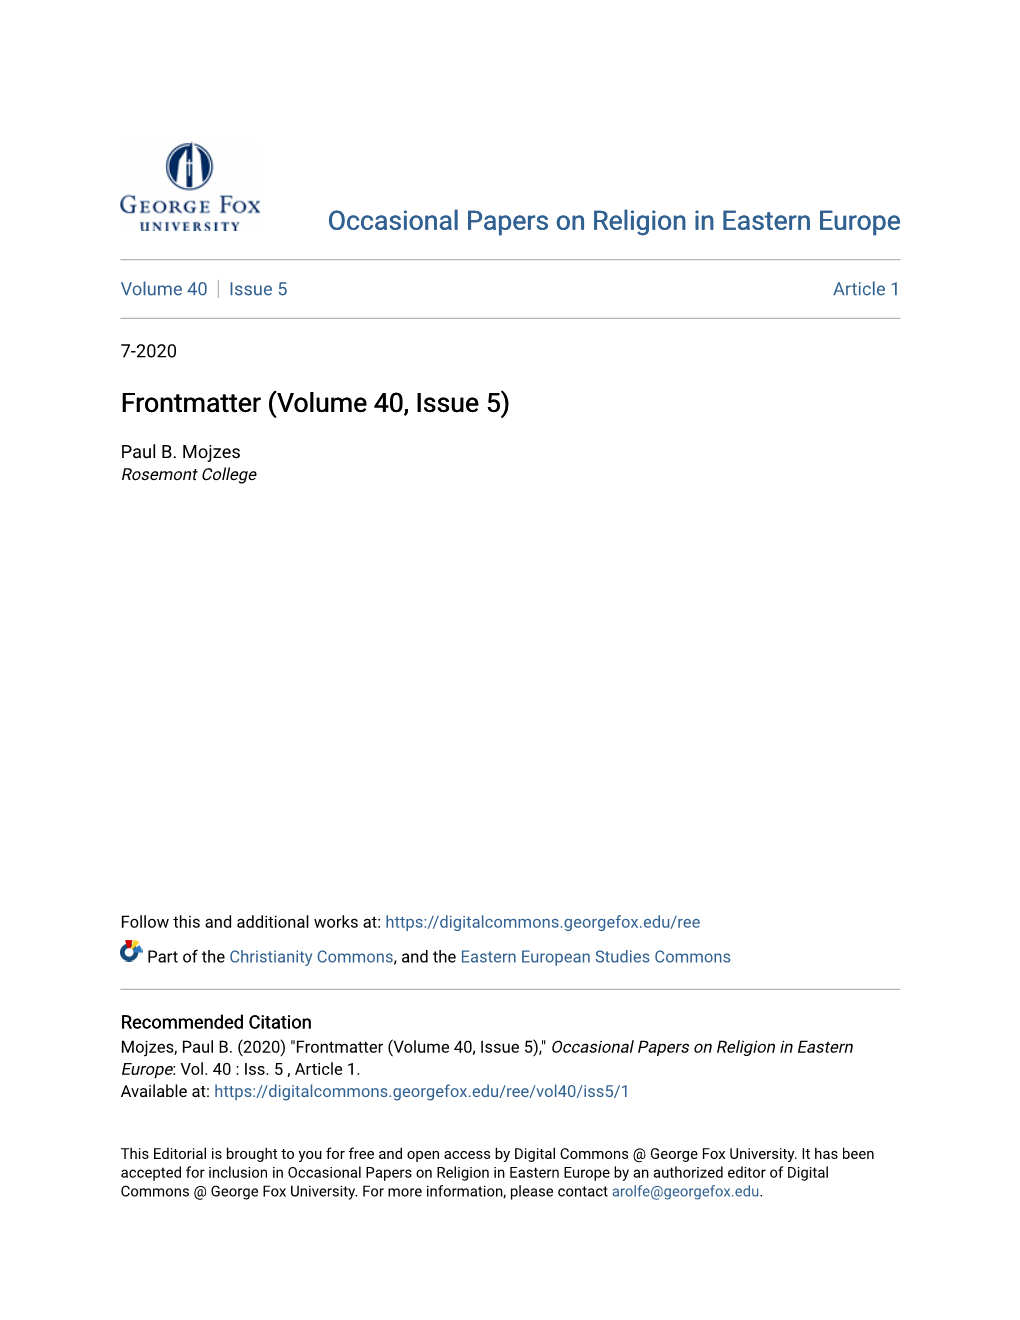 Occasional Papers on Religion in Eastern Europe